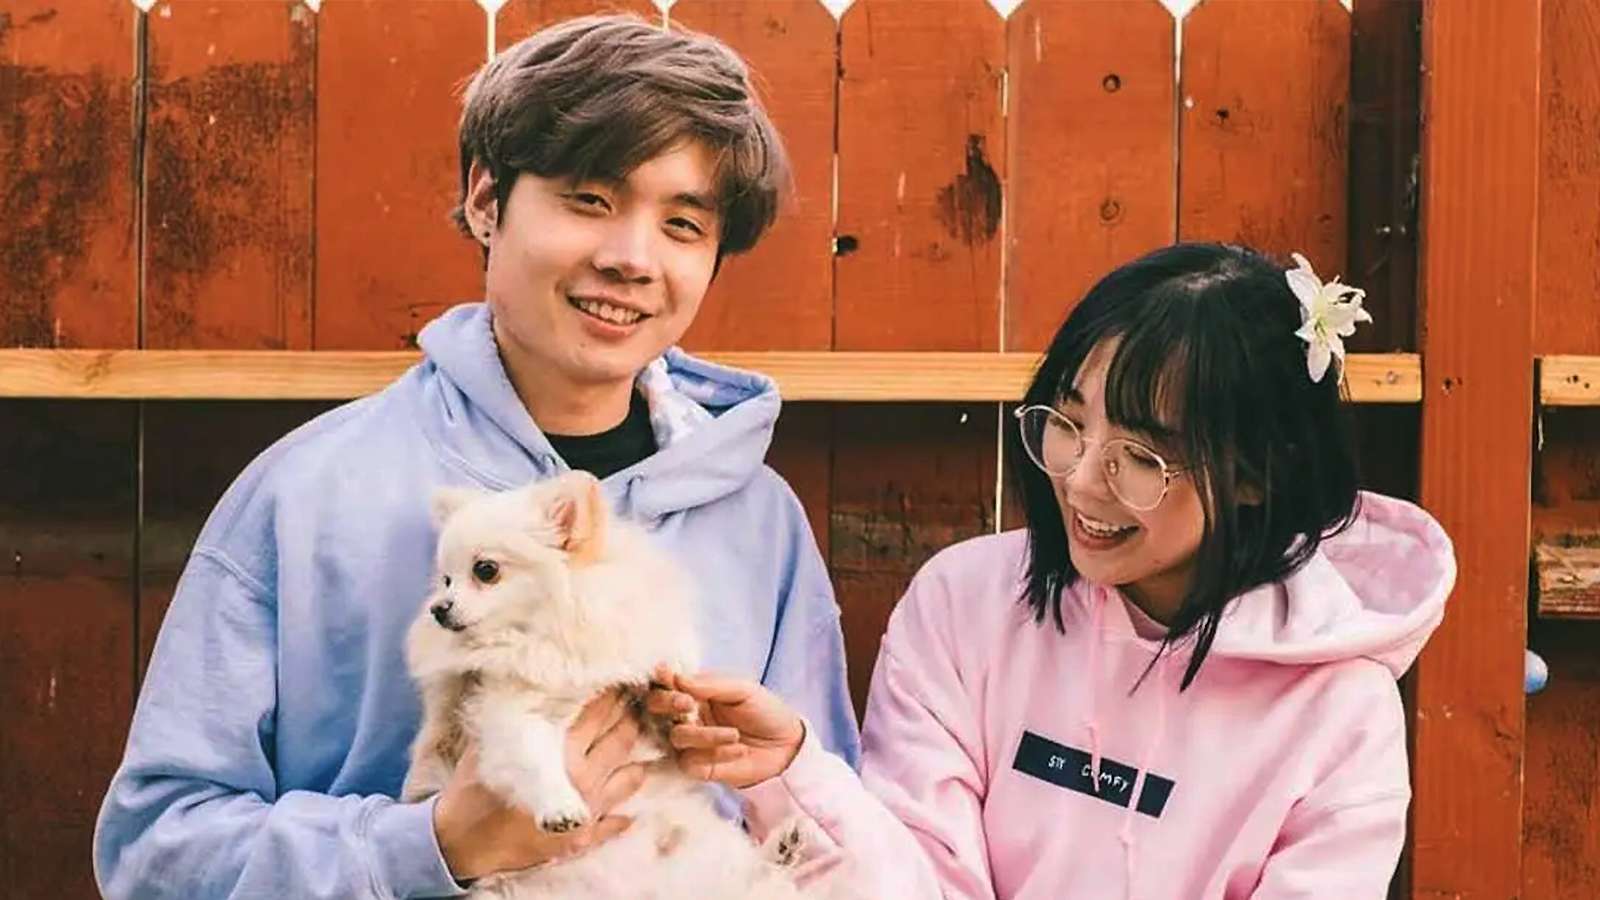 Sleightlymusical and LilyPichu holding dog together